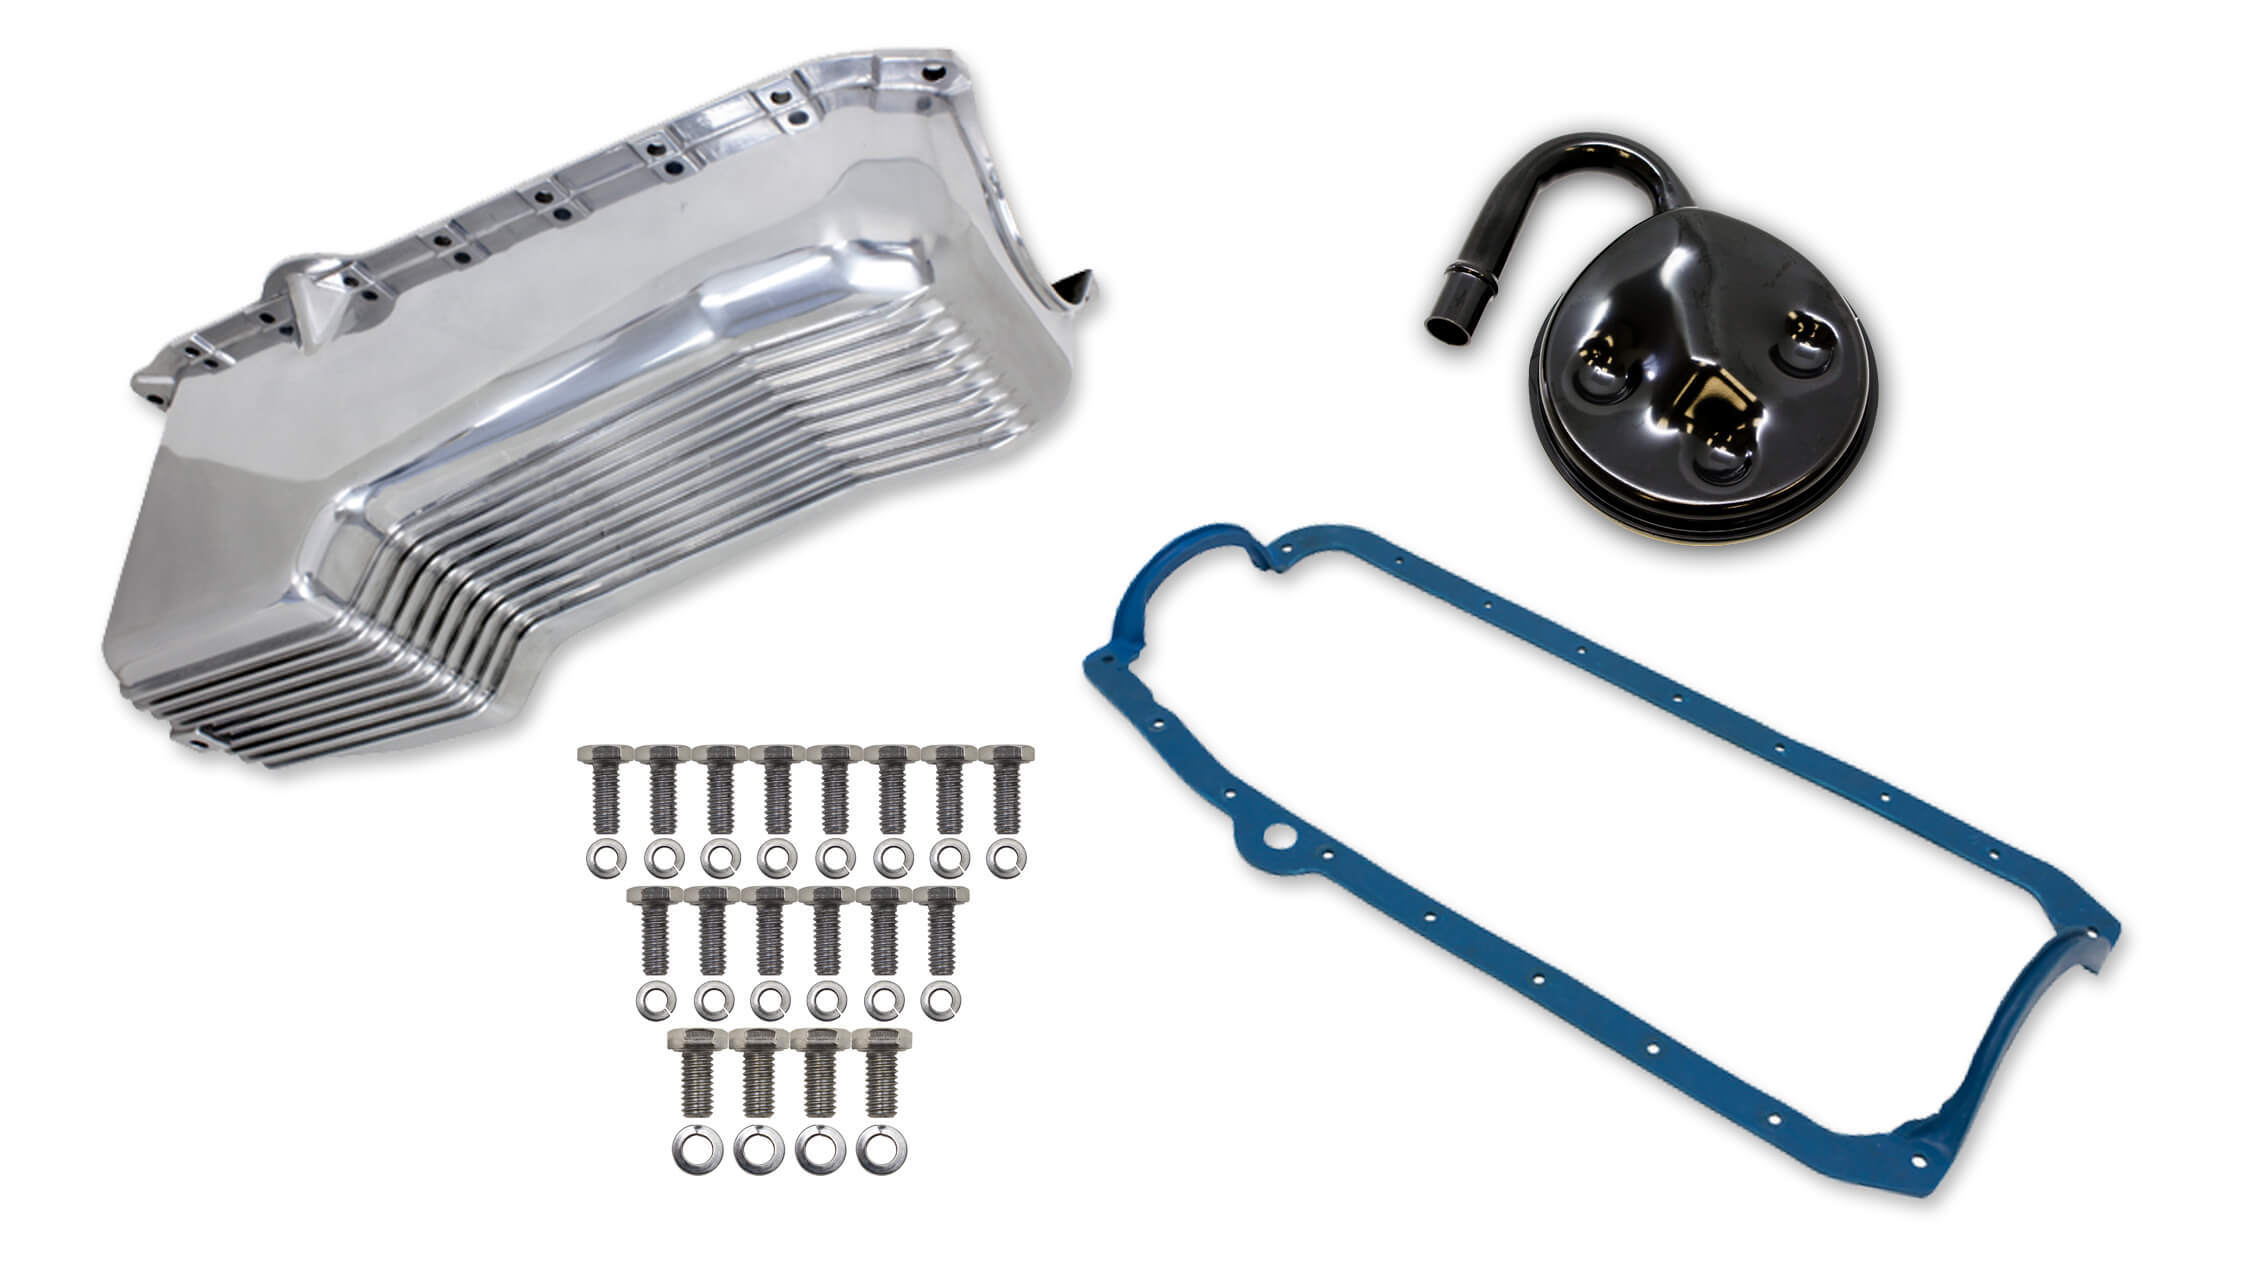 Weiand 6502FWND Engine Oil Pan Kit, Rear Sump, 4 qt, 7-5/16 in Deep, Hardware / Gasket / Pickup, Aluminum, Polished, Small Block Chevy, Kit